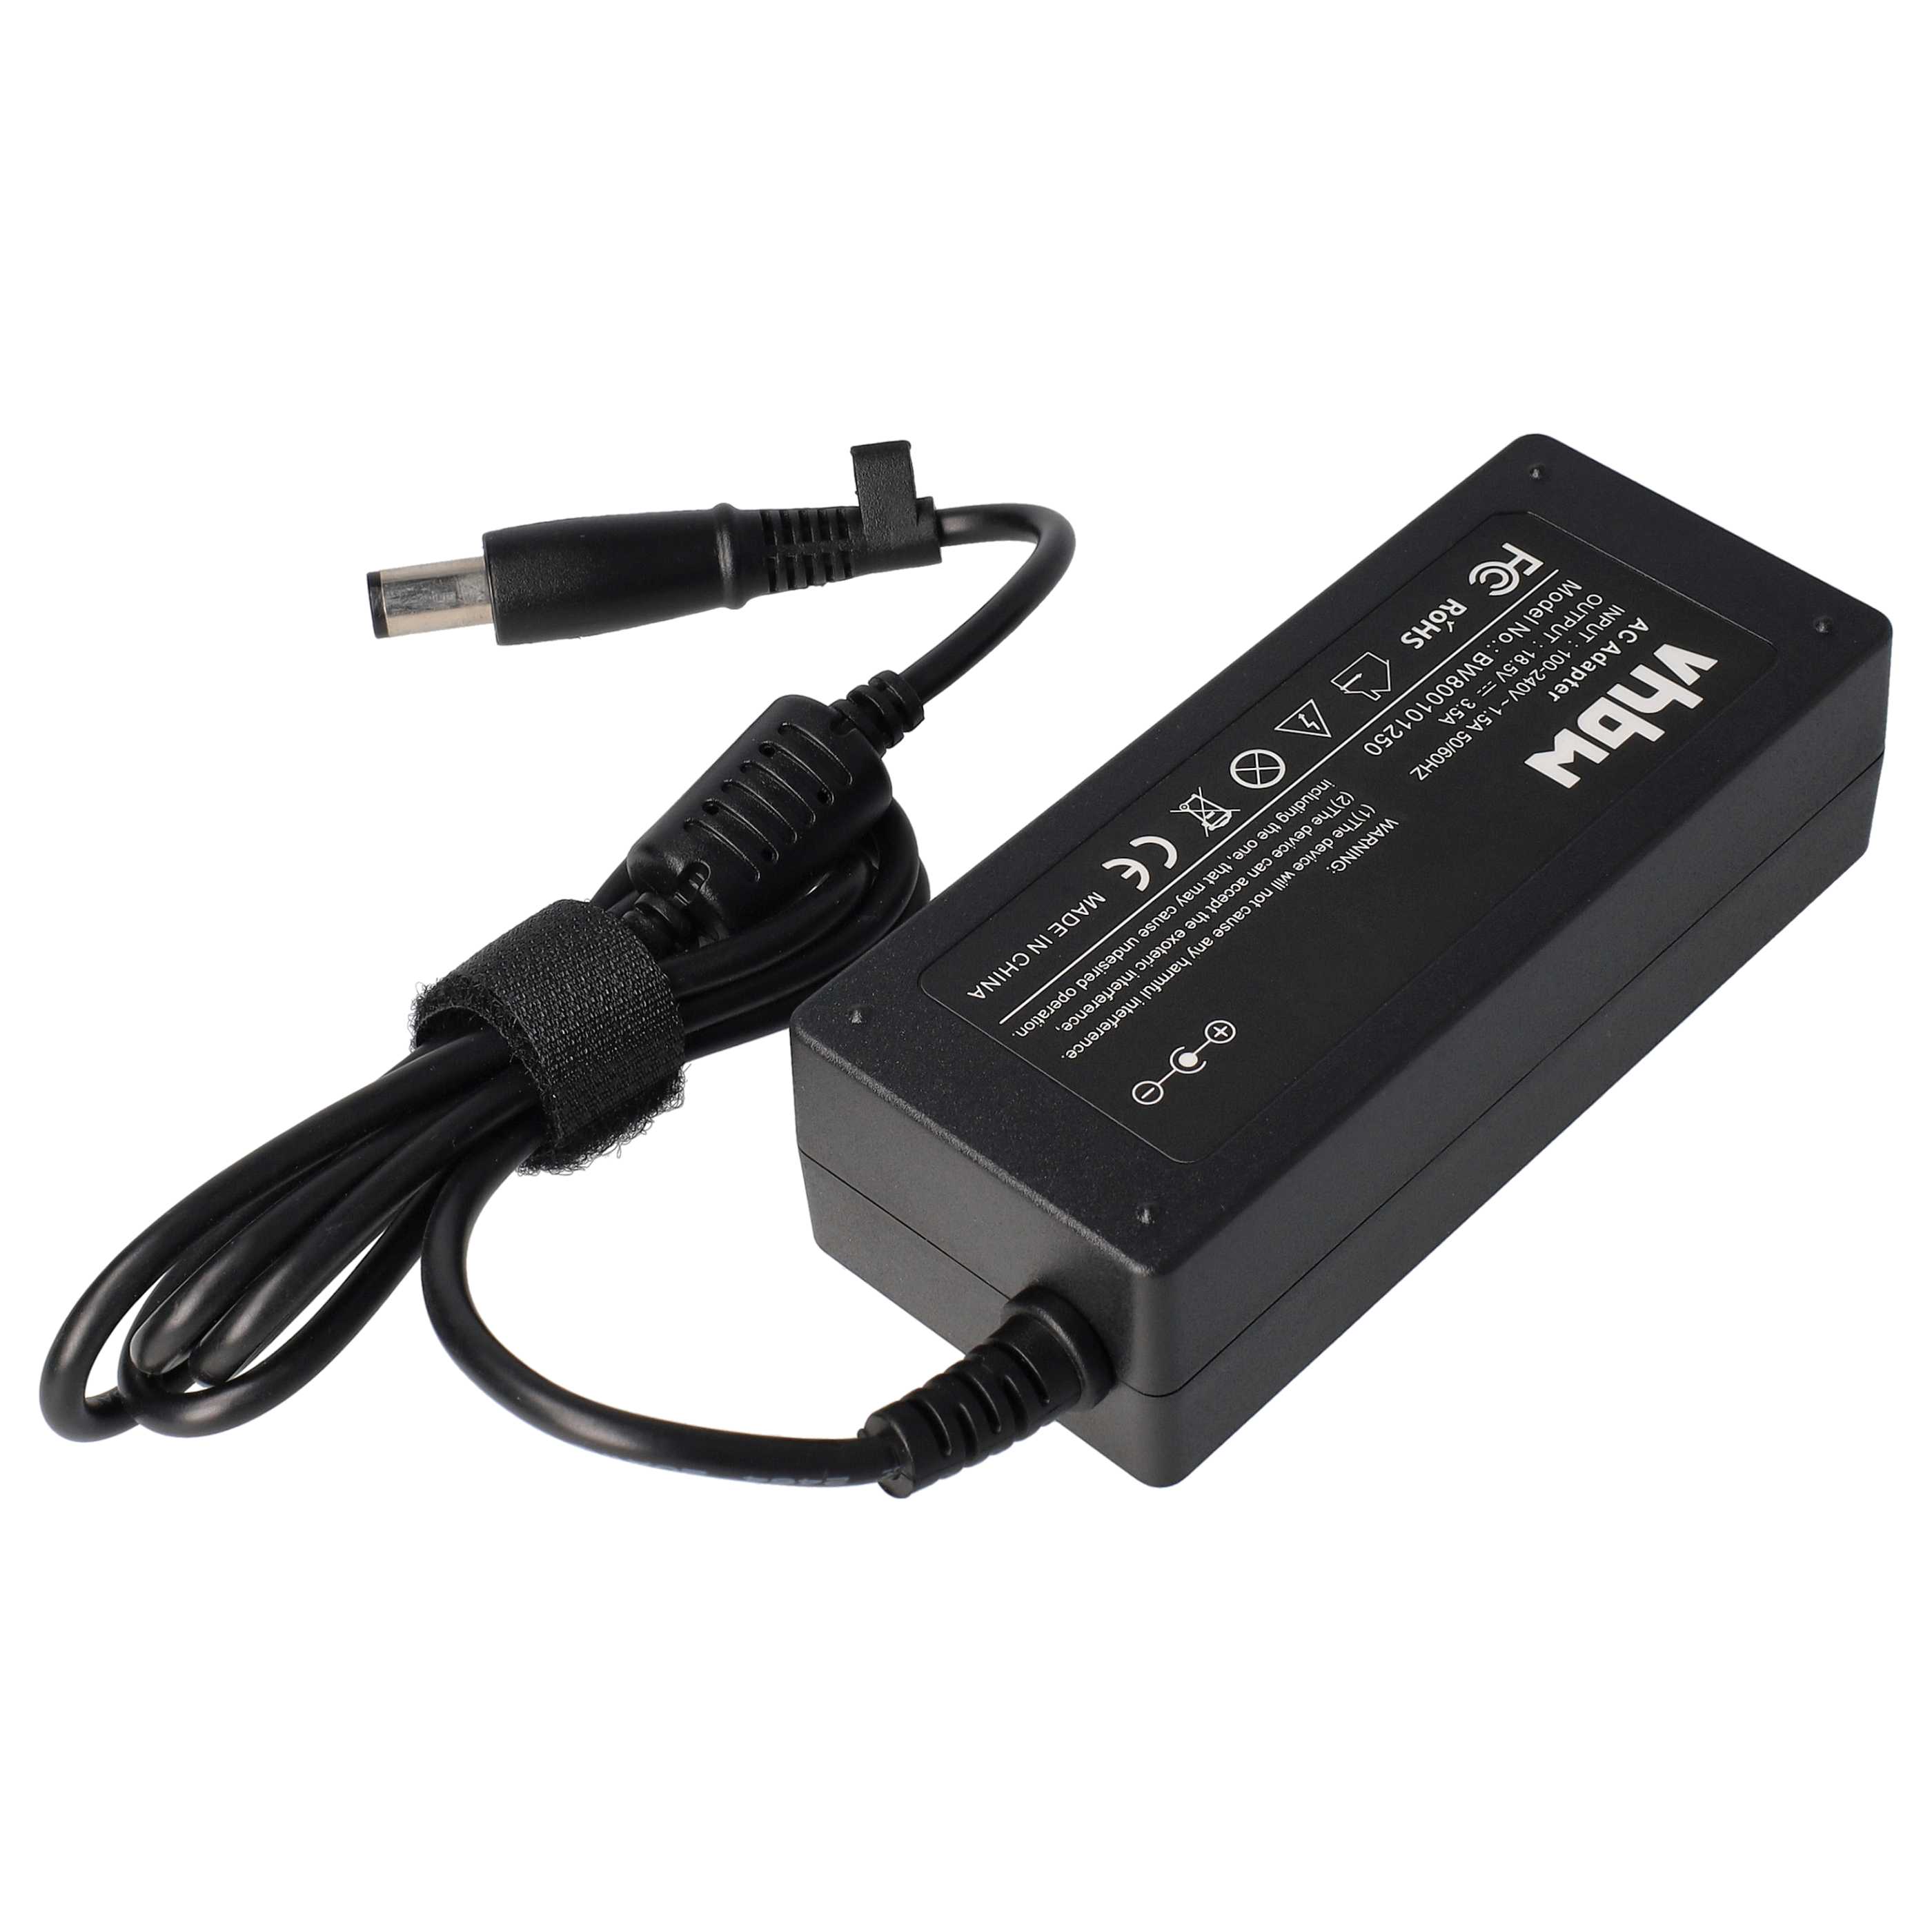 Mains Power Adapter replaces HP 382021-002, 384021-001, AP091F13LF, P/N 391173-001 for HPNotebook etc., 65 W